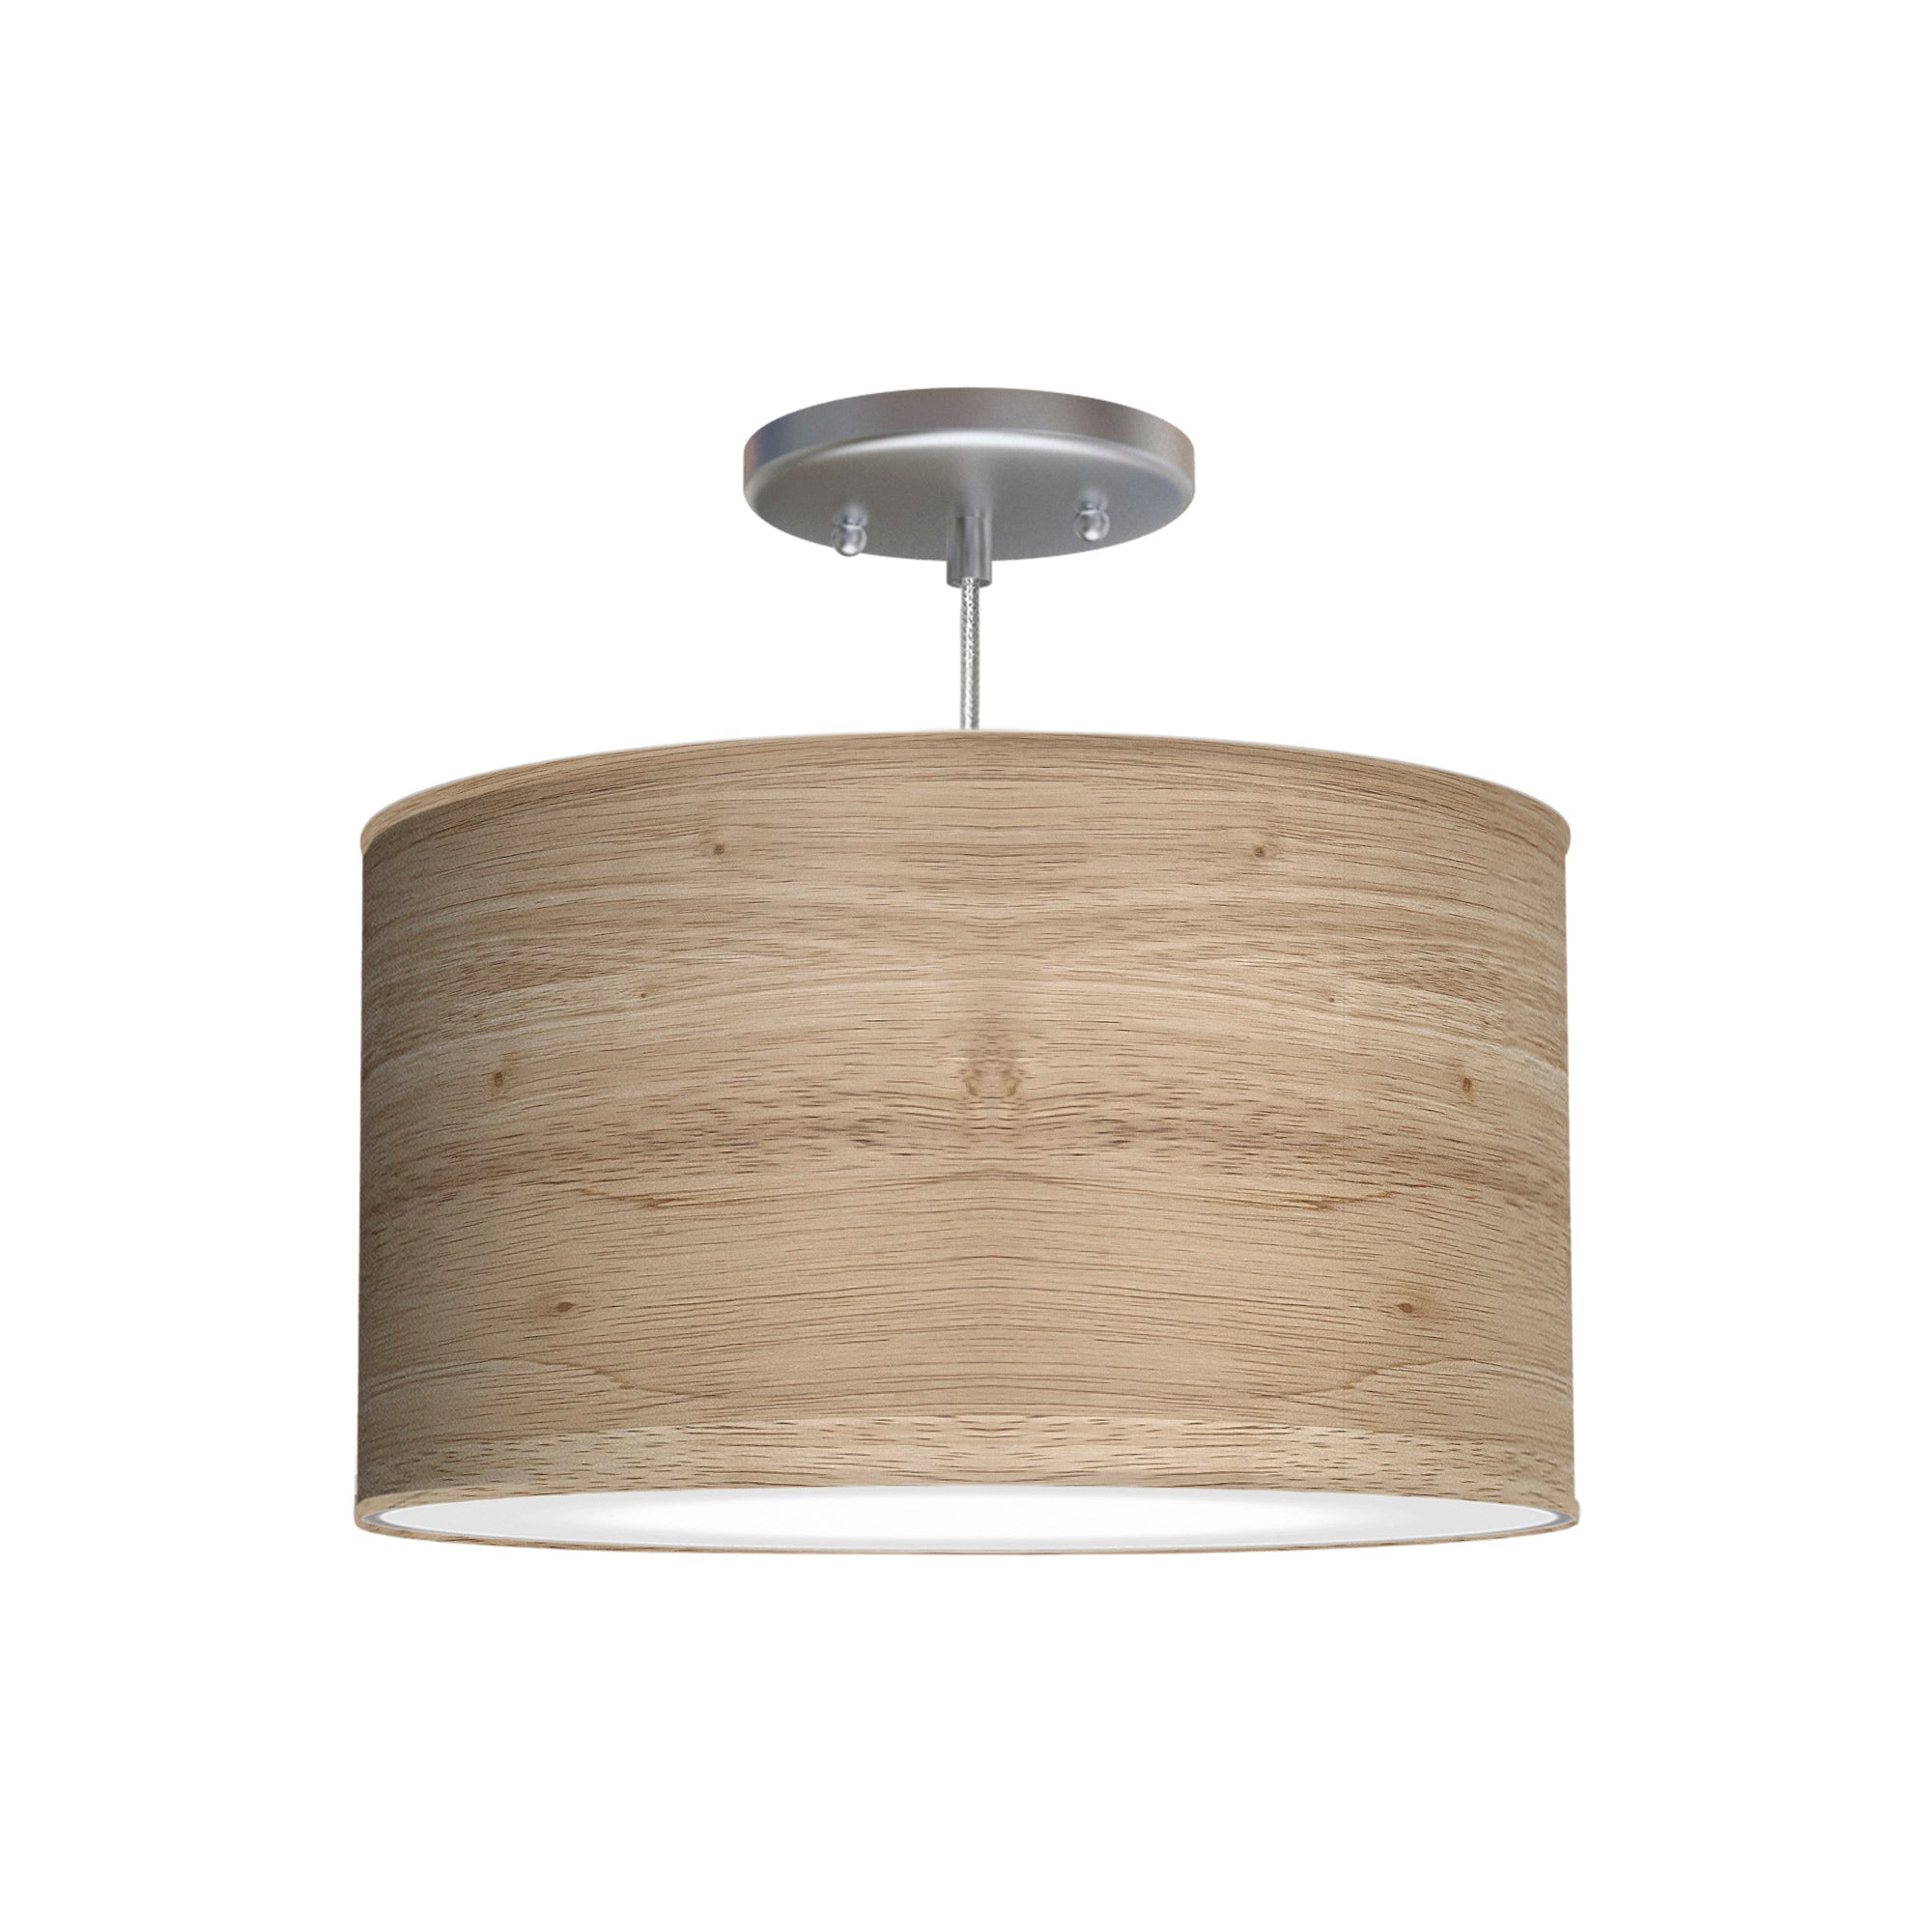 The Gab Hanging Lamp from Seascape Fixtures with a photo veneer shade in natural color.